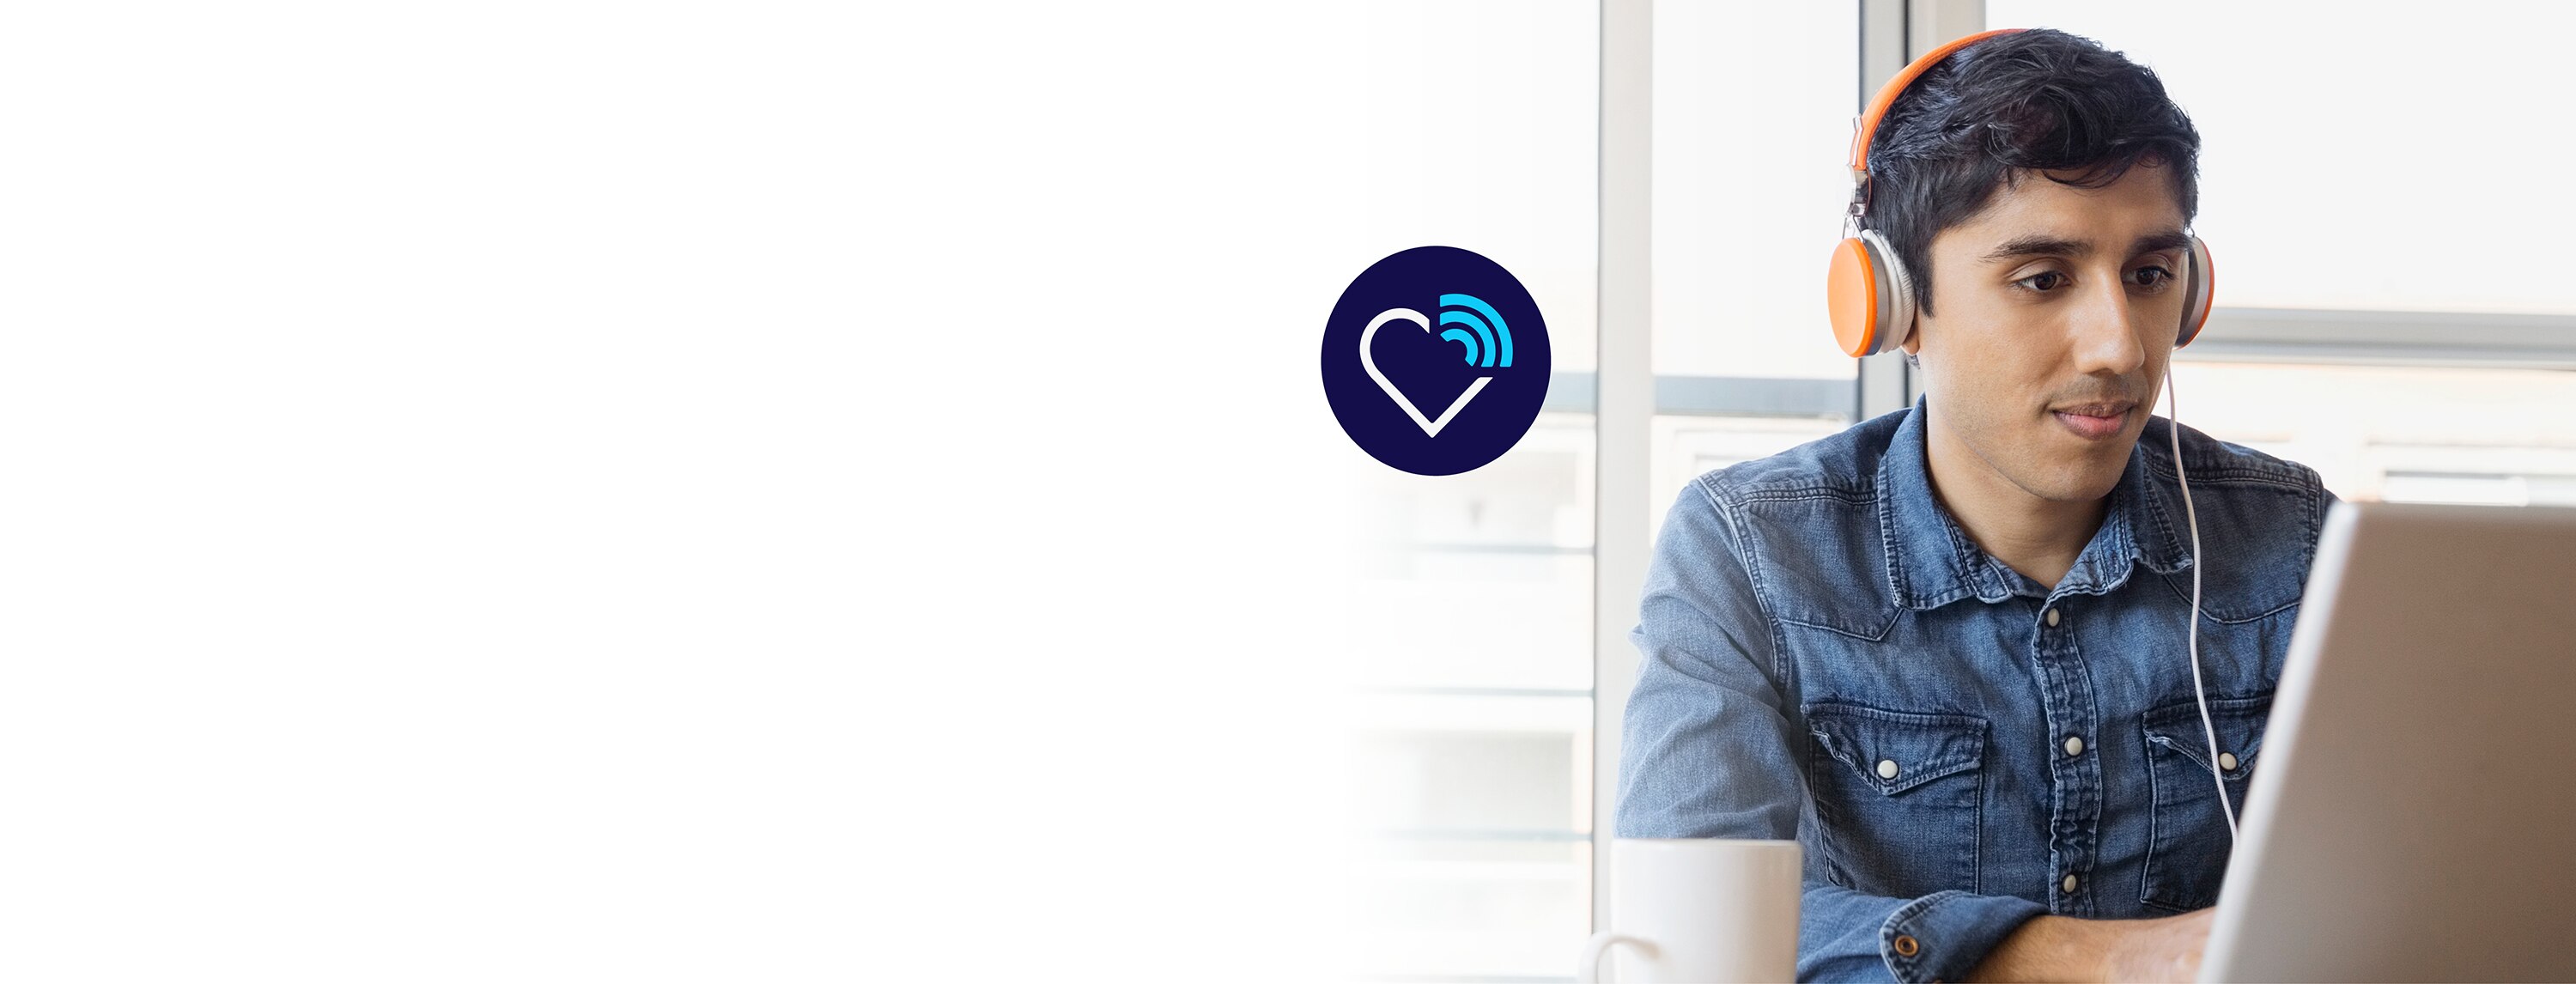 Encircled heart icon with network connection floating next to man wearing orange headphones sitting and looking at laptop